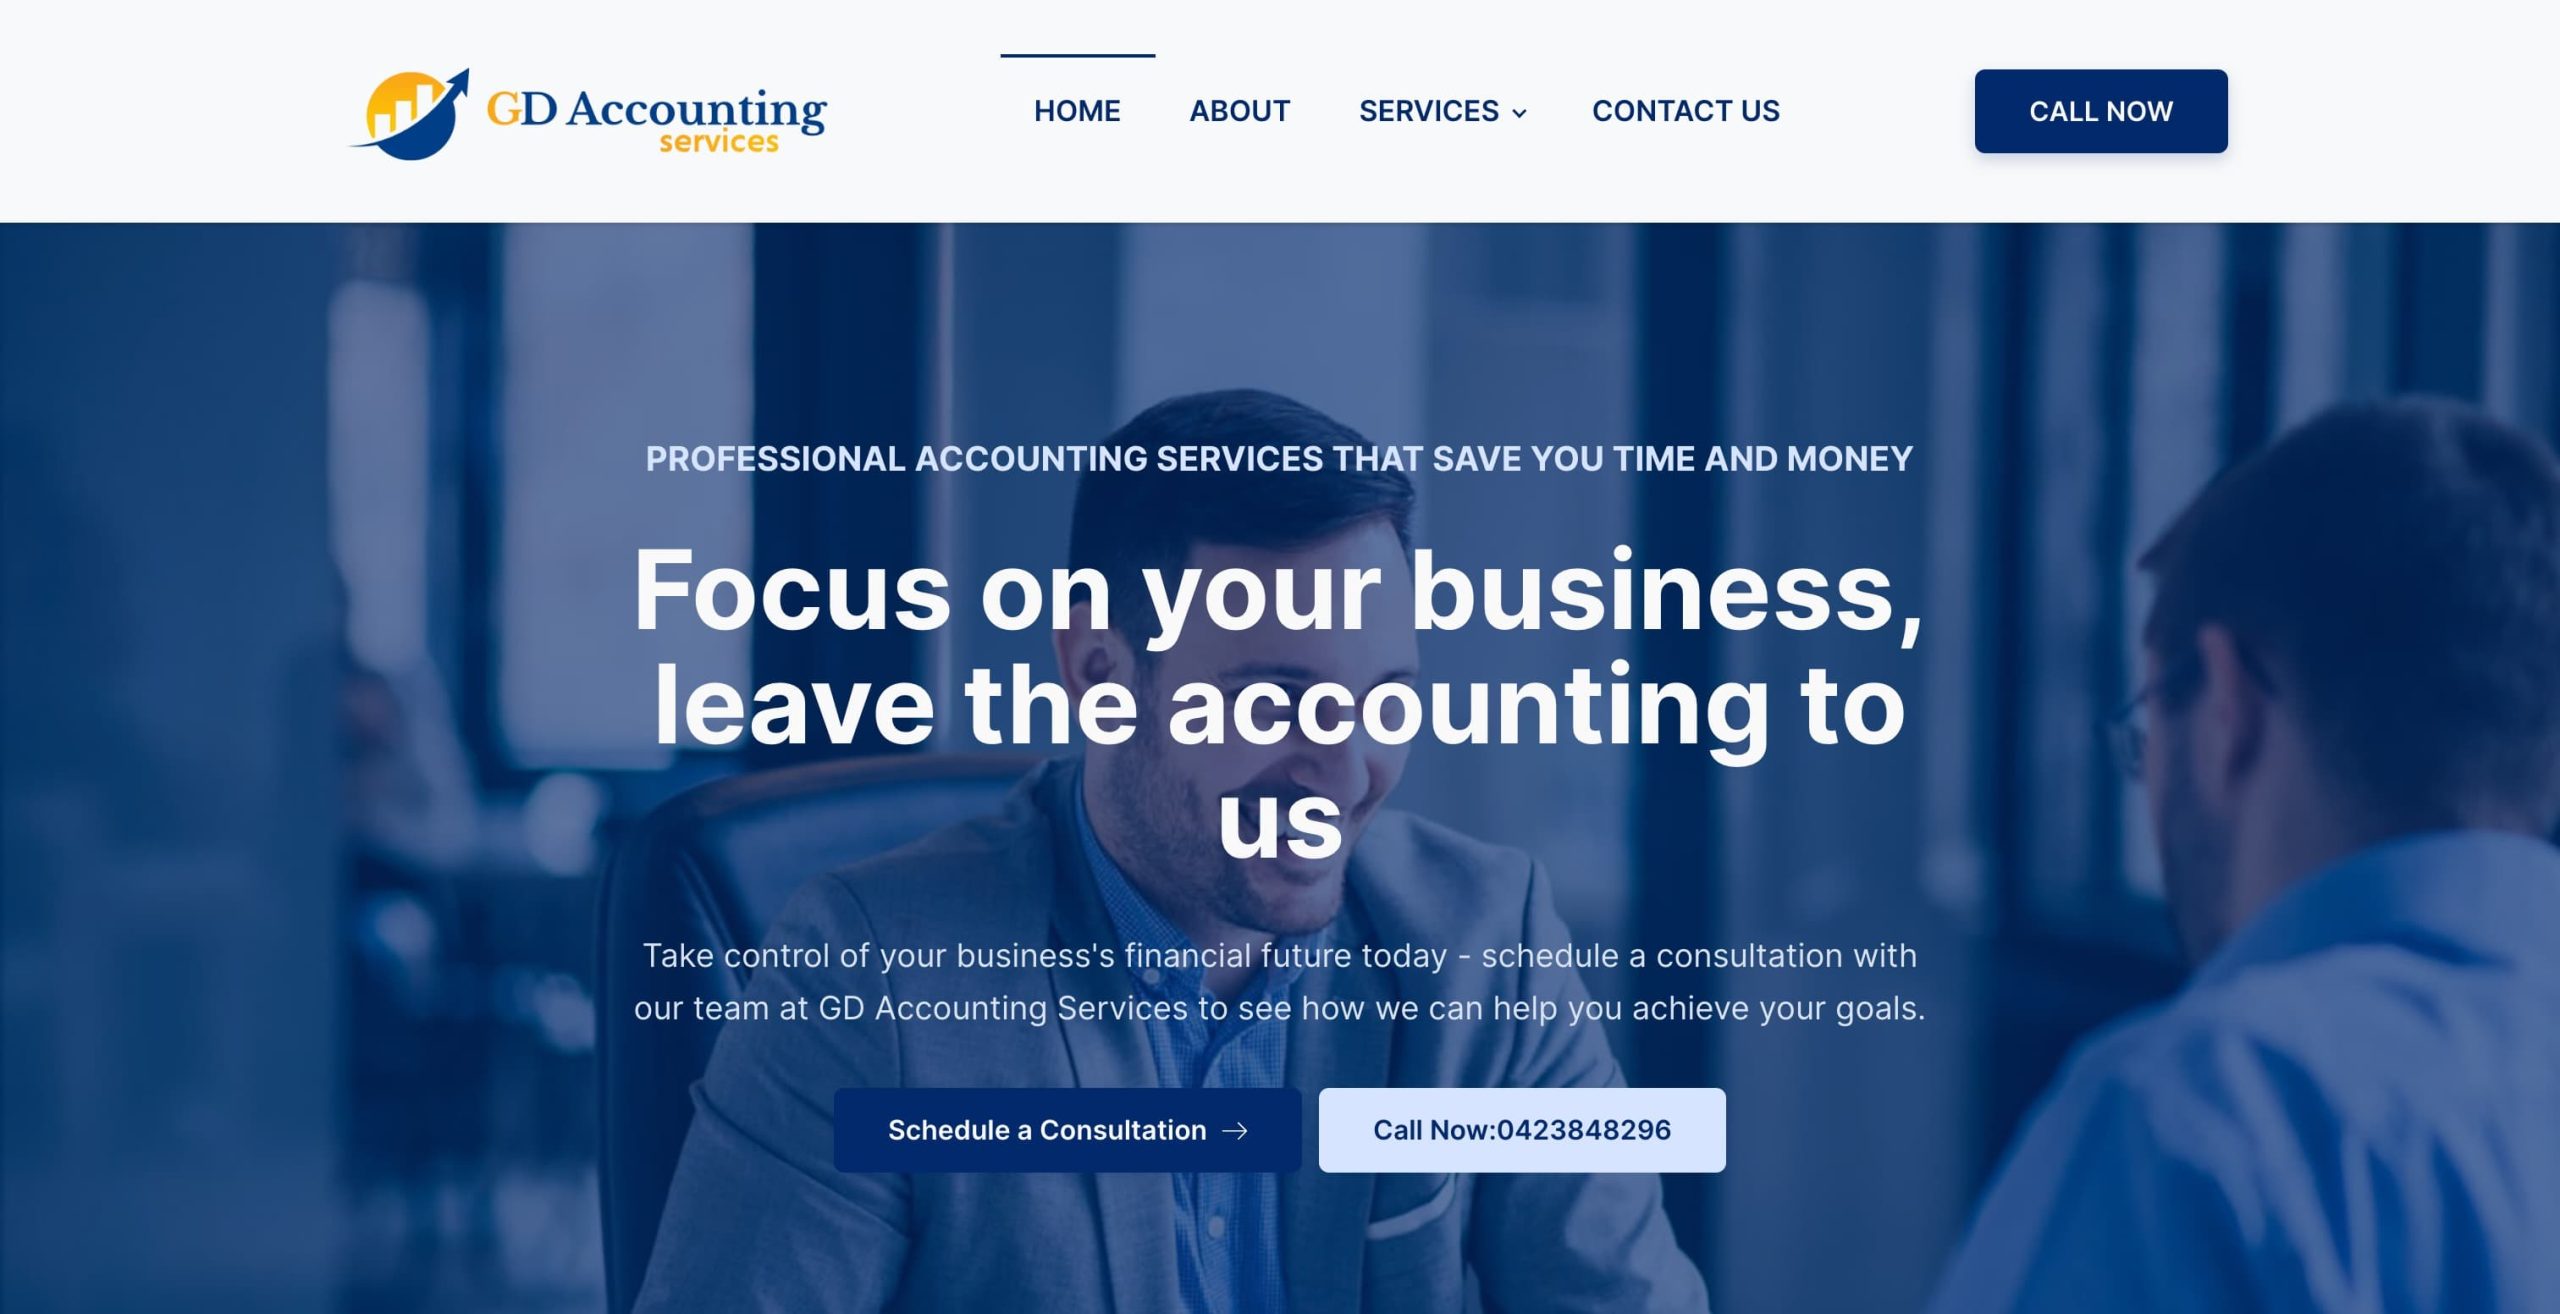 GD Accounting Services, Sydney